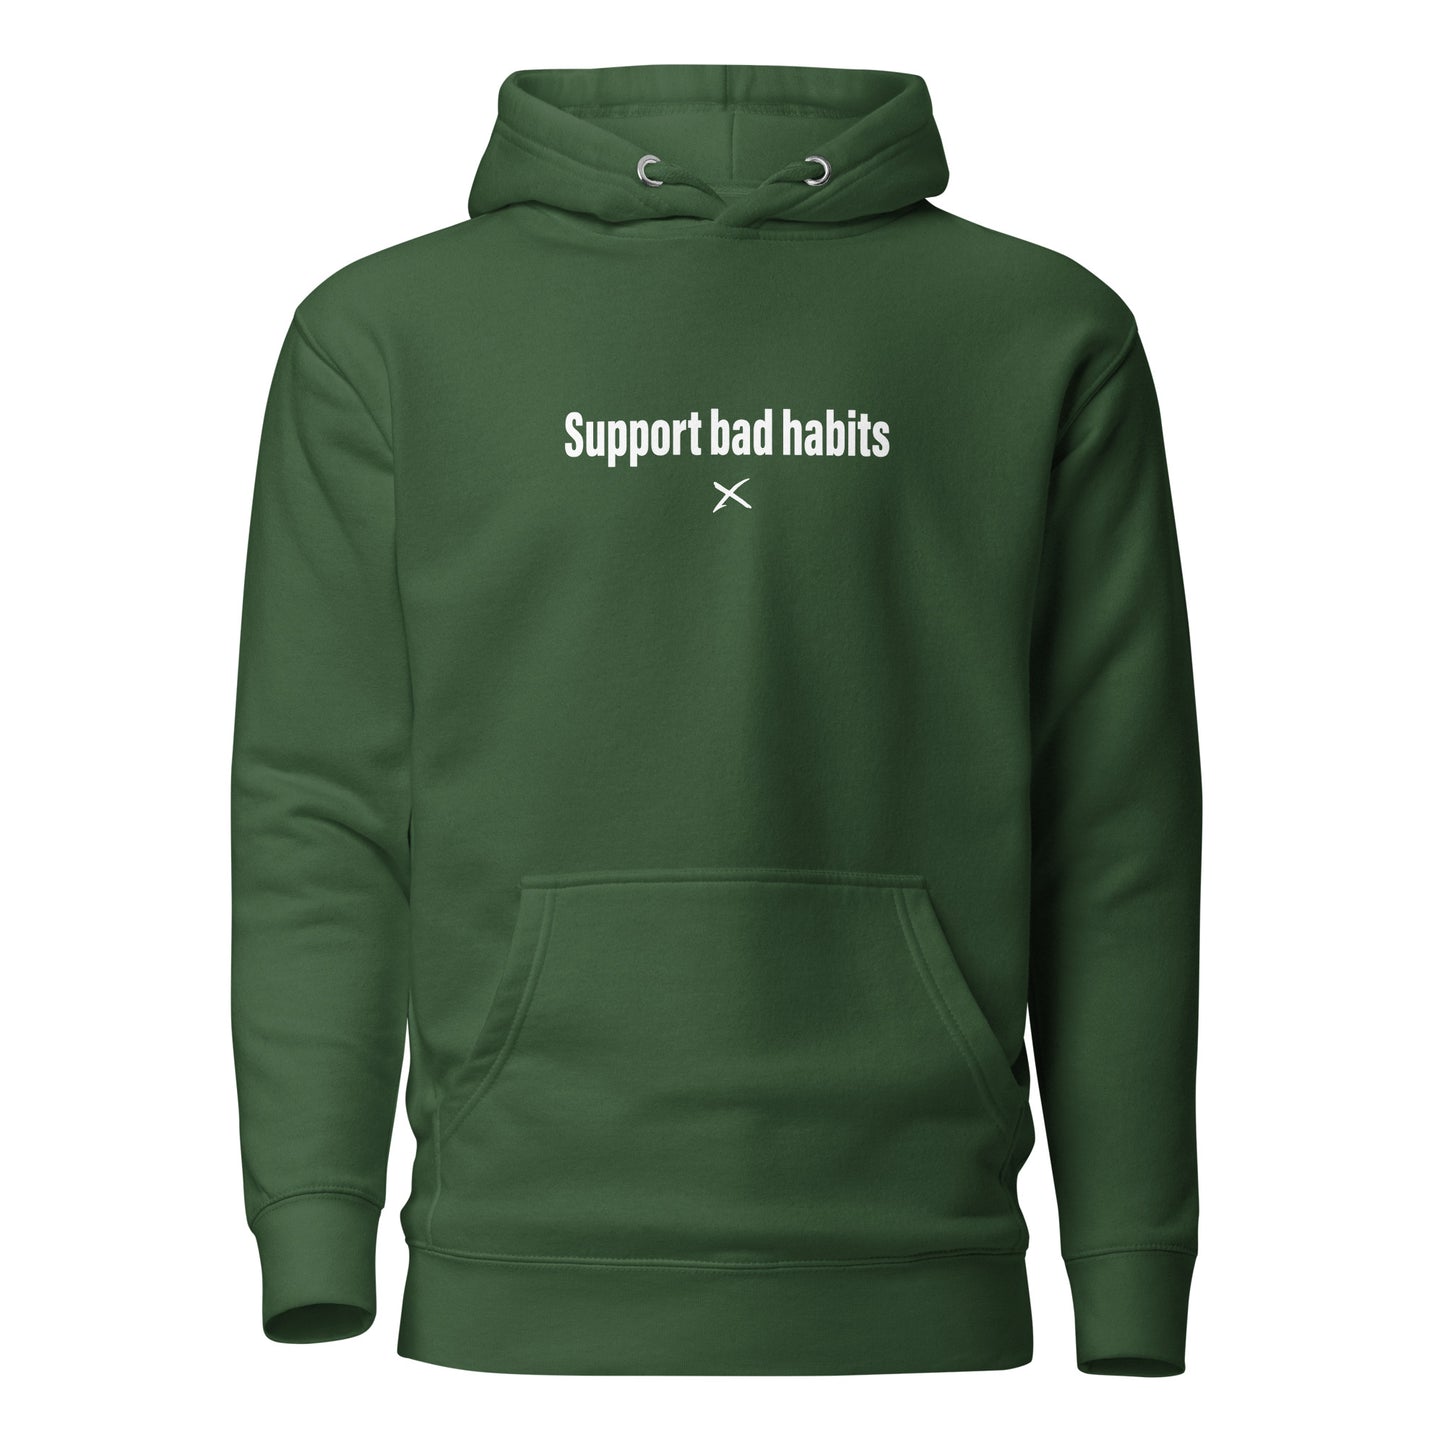 Support bad habits - Hoodie